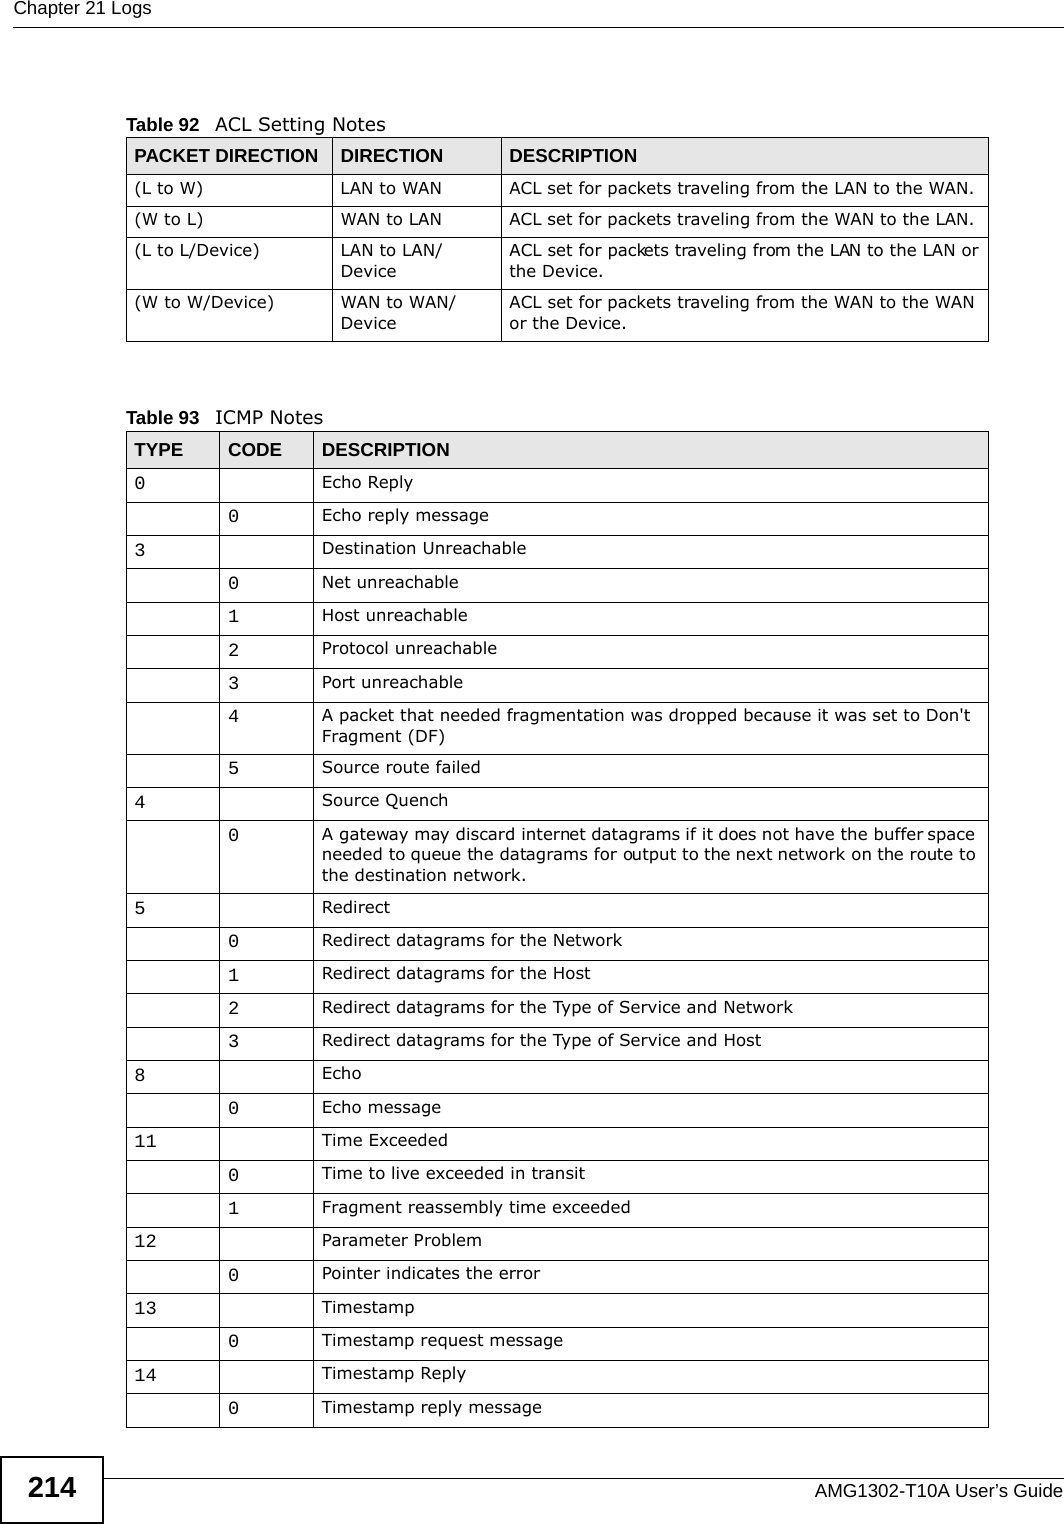 Chapter 21 LogsAMG1302-T10A User’s Guide214 Table 92   ACL Setting NotesPACKET DIRECTION DIRECTION DESCRIPTION(L to W) LAN to WAN ACL set for packets traveling from the LAN to the WAN.(W to L) WAN to LAN ACL set for packets traveling from the WAN to the LAN.(L to L/Device) LAN to LAN/DeviceACL set for packets traveling from the LAN to the LAN or the Device.(W to W/Device) WAN to WAN/DeviceACL set for packets traveling from the WAN to the WAN or the Device.Table 93   ICMP NotesTYPE CODE DESCRIPTION0Echo Reply0Echo reply message3Destination Unreachable0Net unreachable1Host unreachable2Protocol unreachable3Port unreachable4A packet that needed fragmentation was dropped because it was set to Don&apos;t Fragment (DF)5Source route failed4Source Quench0A gateway may discard internet datagrams if it does not have the buffer space needed to queue the datagrams for output to the next network on the route to the destination network.5Redirect0Redirect datagrams for the Network1Redirect datagrams for the Host2Redirect datagrams for the Type of Service and Network3Redirect datagrams for the Type of Service and Host8Echo0Echo message11 Time Exceeded0Time to live exceeded in transit1Fragment reassembly time exceeded12 Parameter Problem0Pointer indicates the error13 Timestamp0Timestamp request message14 Timestamp Reply0Timestamp reply message